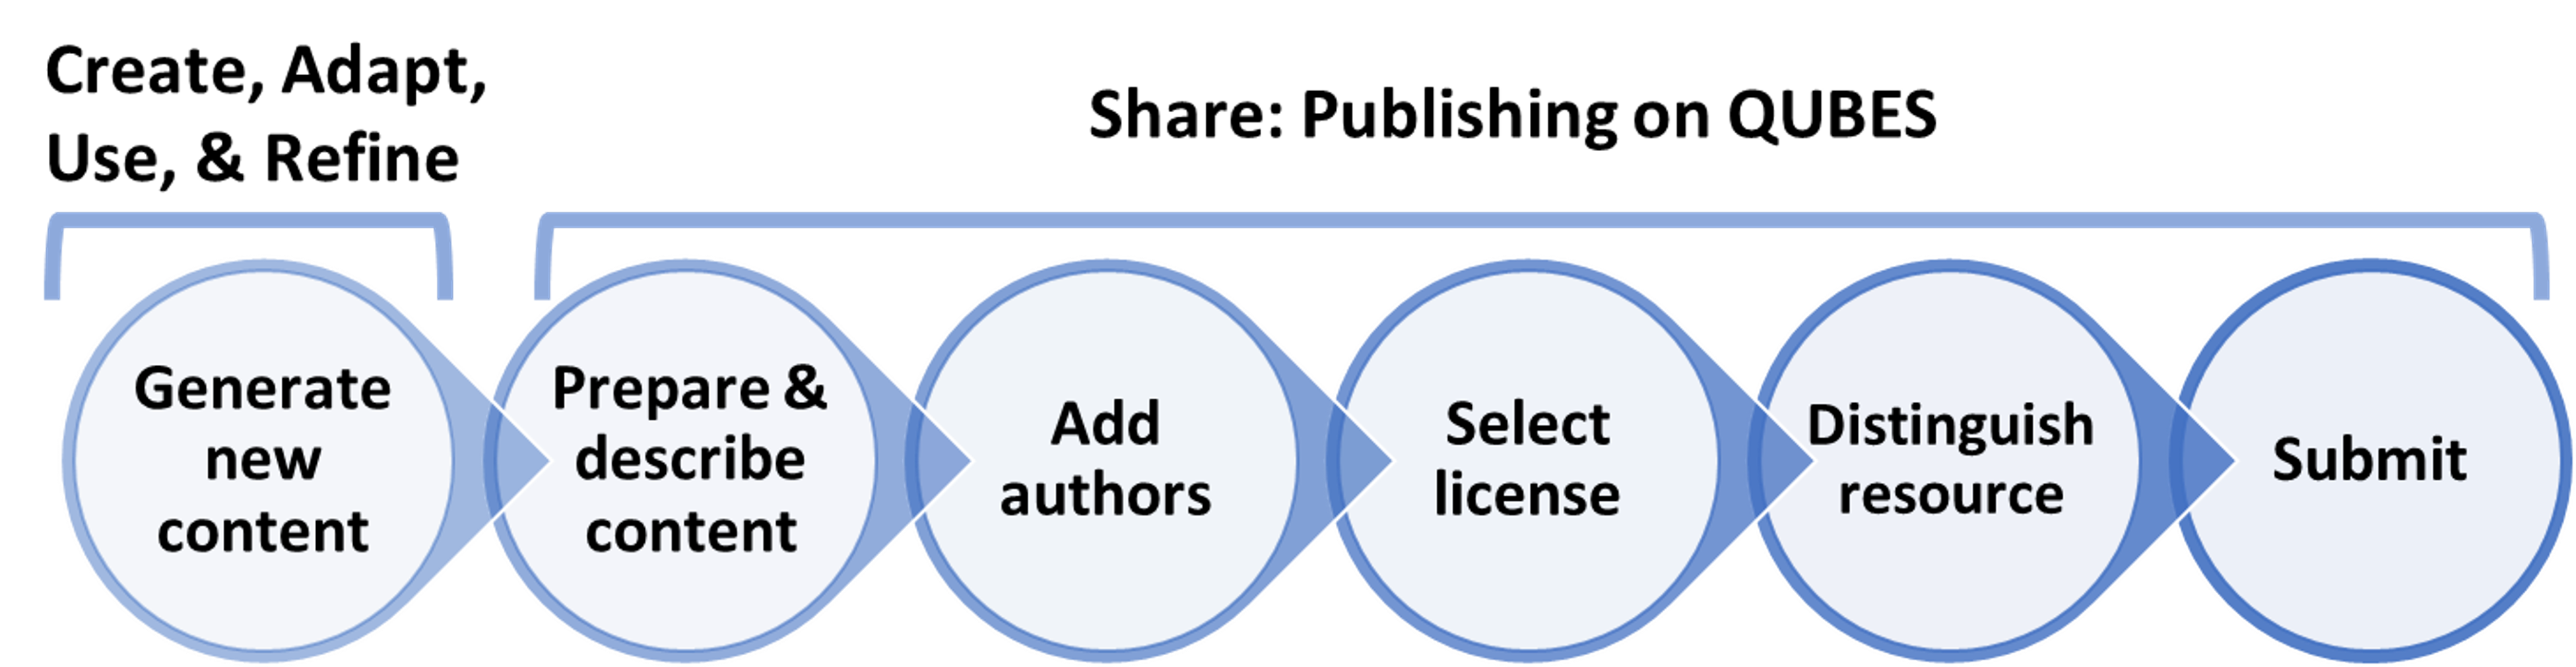 overview of the publishing process. Create, adapt, use, and refine lead to the generation of new content. Share encompasses all the steps to publishing on QUBES: describe content, add authors, select license, distinguish resource, and submit